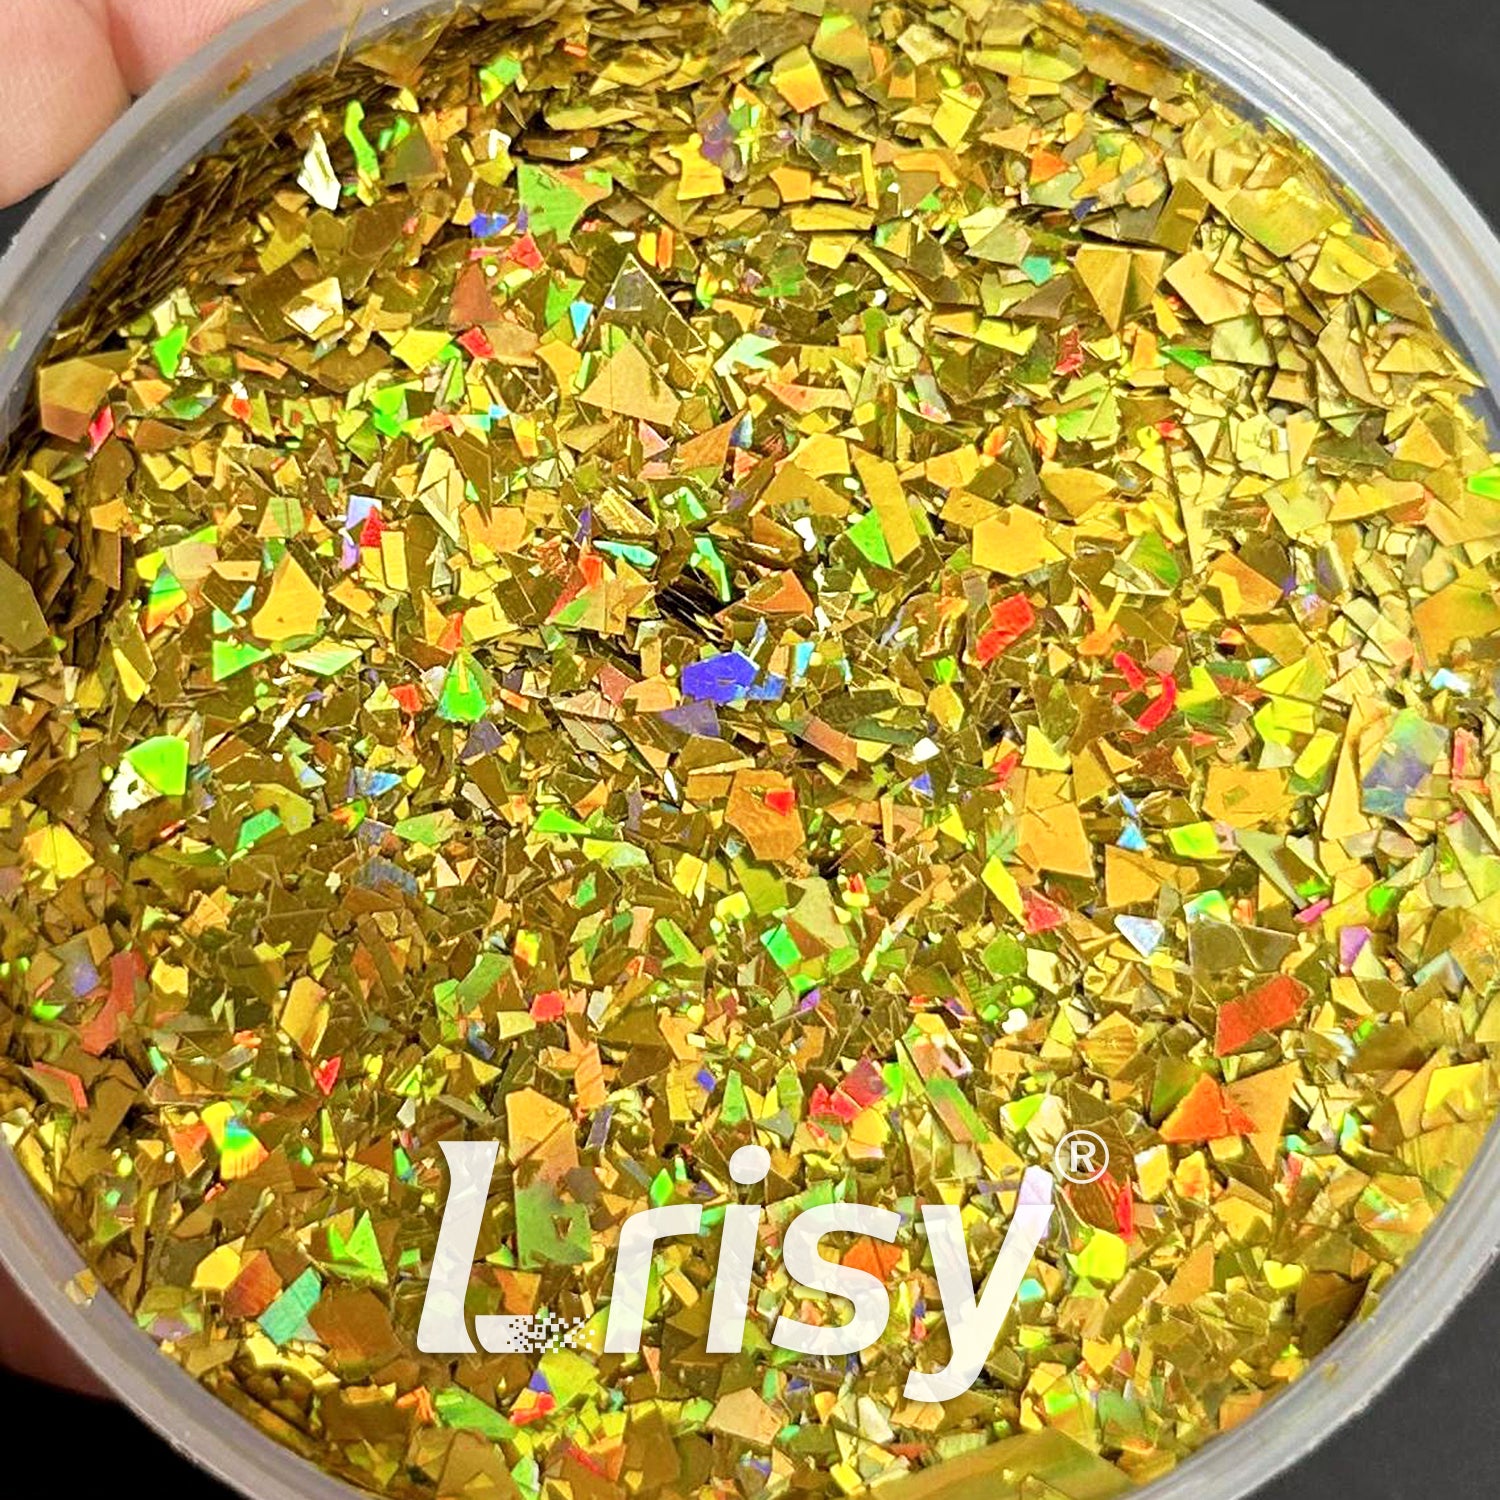 Holographic Gold Cellophane Glitter Flakes Holo Shards LB0210 4x4